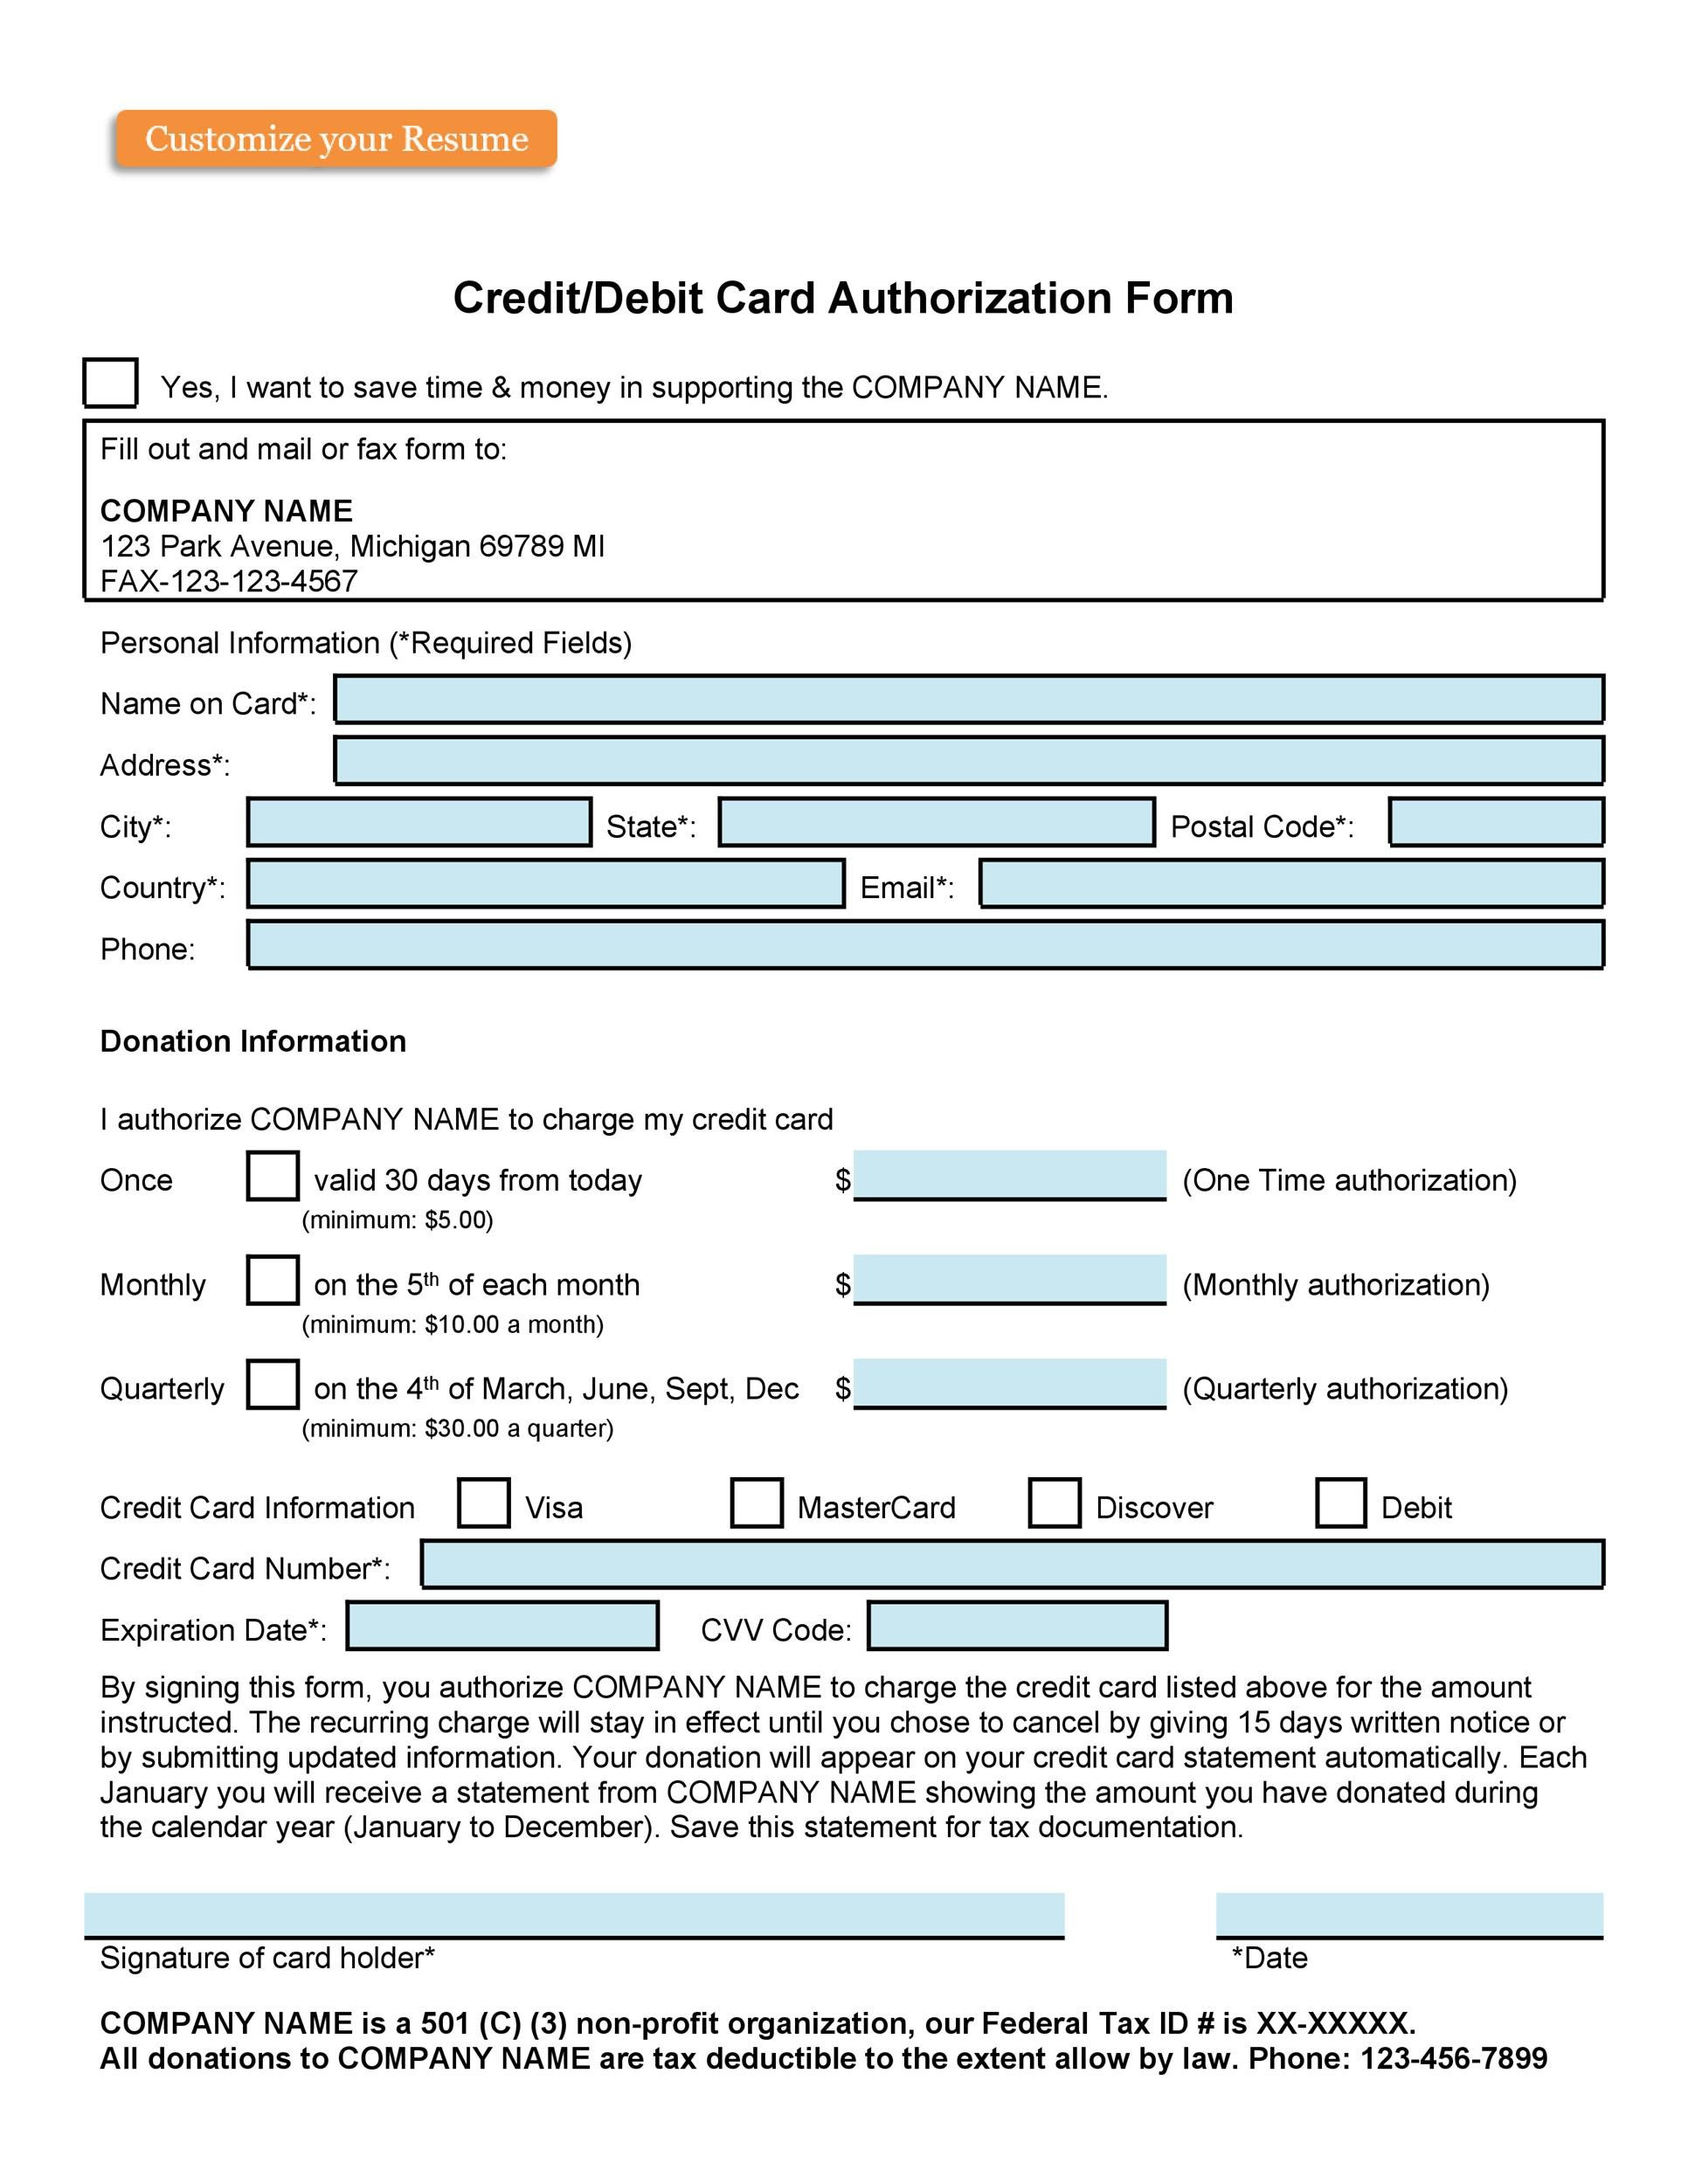 Authorization Letter For Bank To Collect Debit Card - Letter